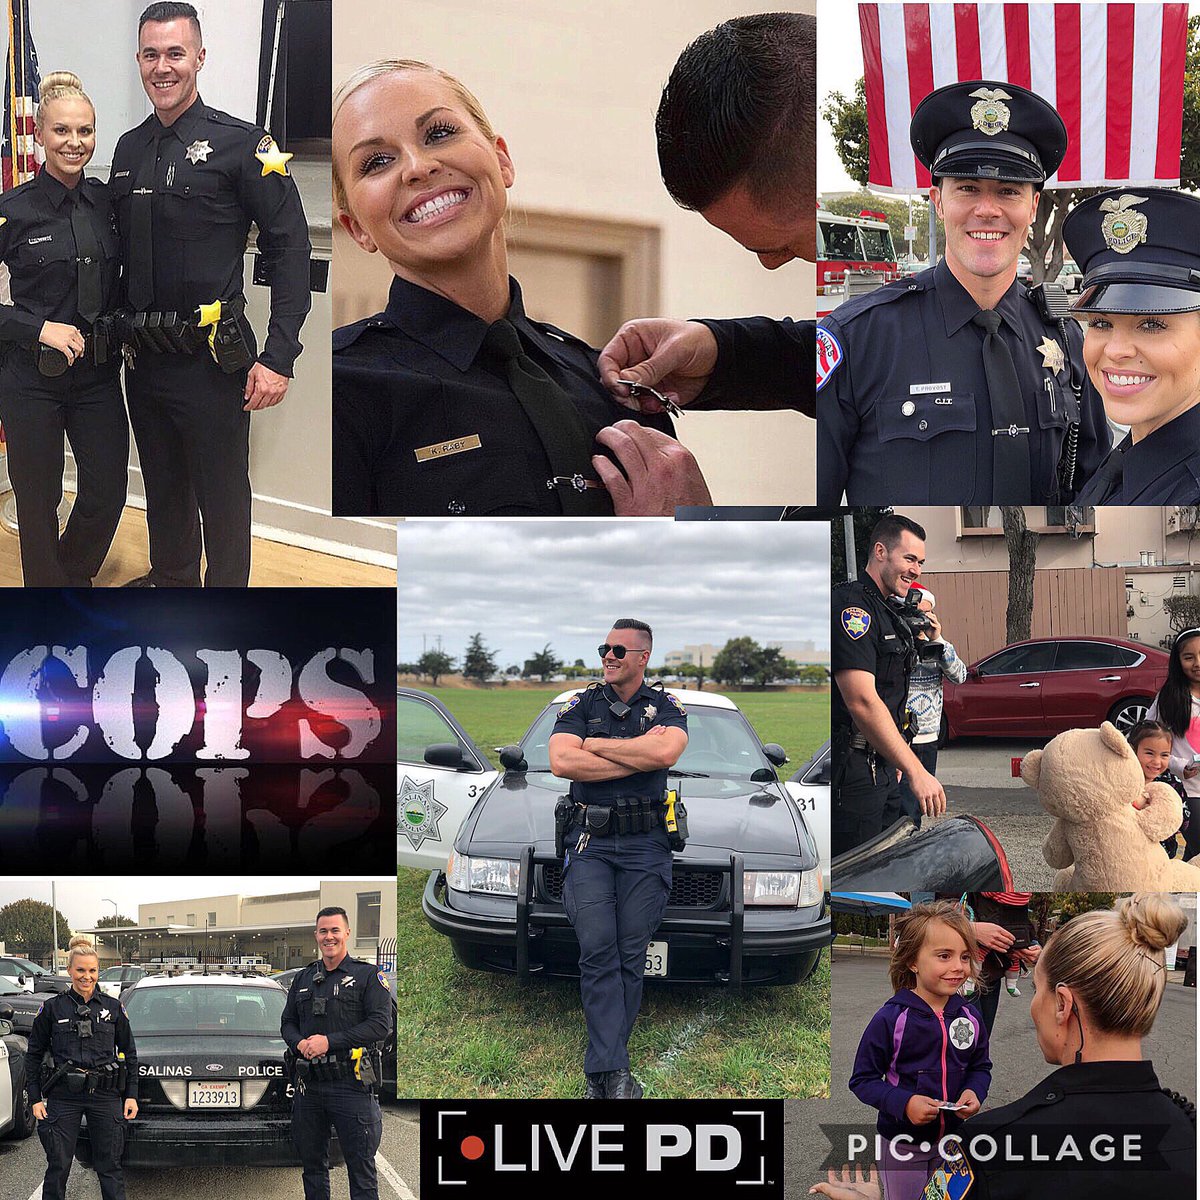 A few of my favorite picture from @Ofc_KatherineR and I this past year. Kat’s graduation and pinning ceremony, the 9/11 ceremony, riding with #livepd and #cops and giving back to the community. Memorable year. #captainamerica #bunsandguns #spd #copcouple